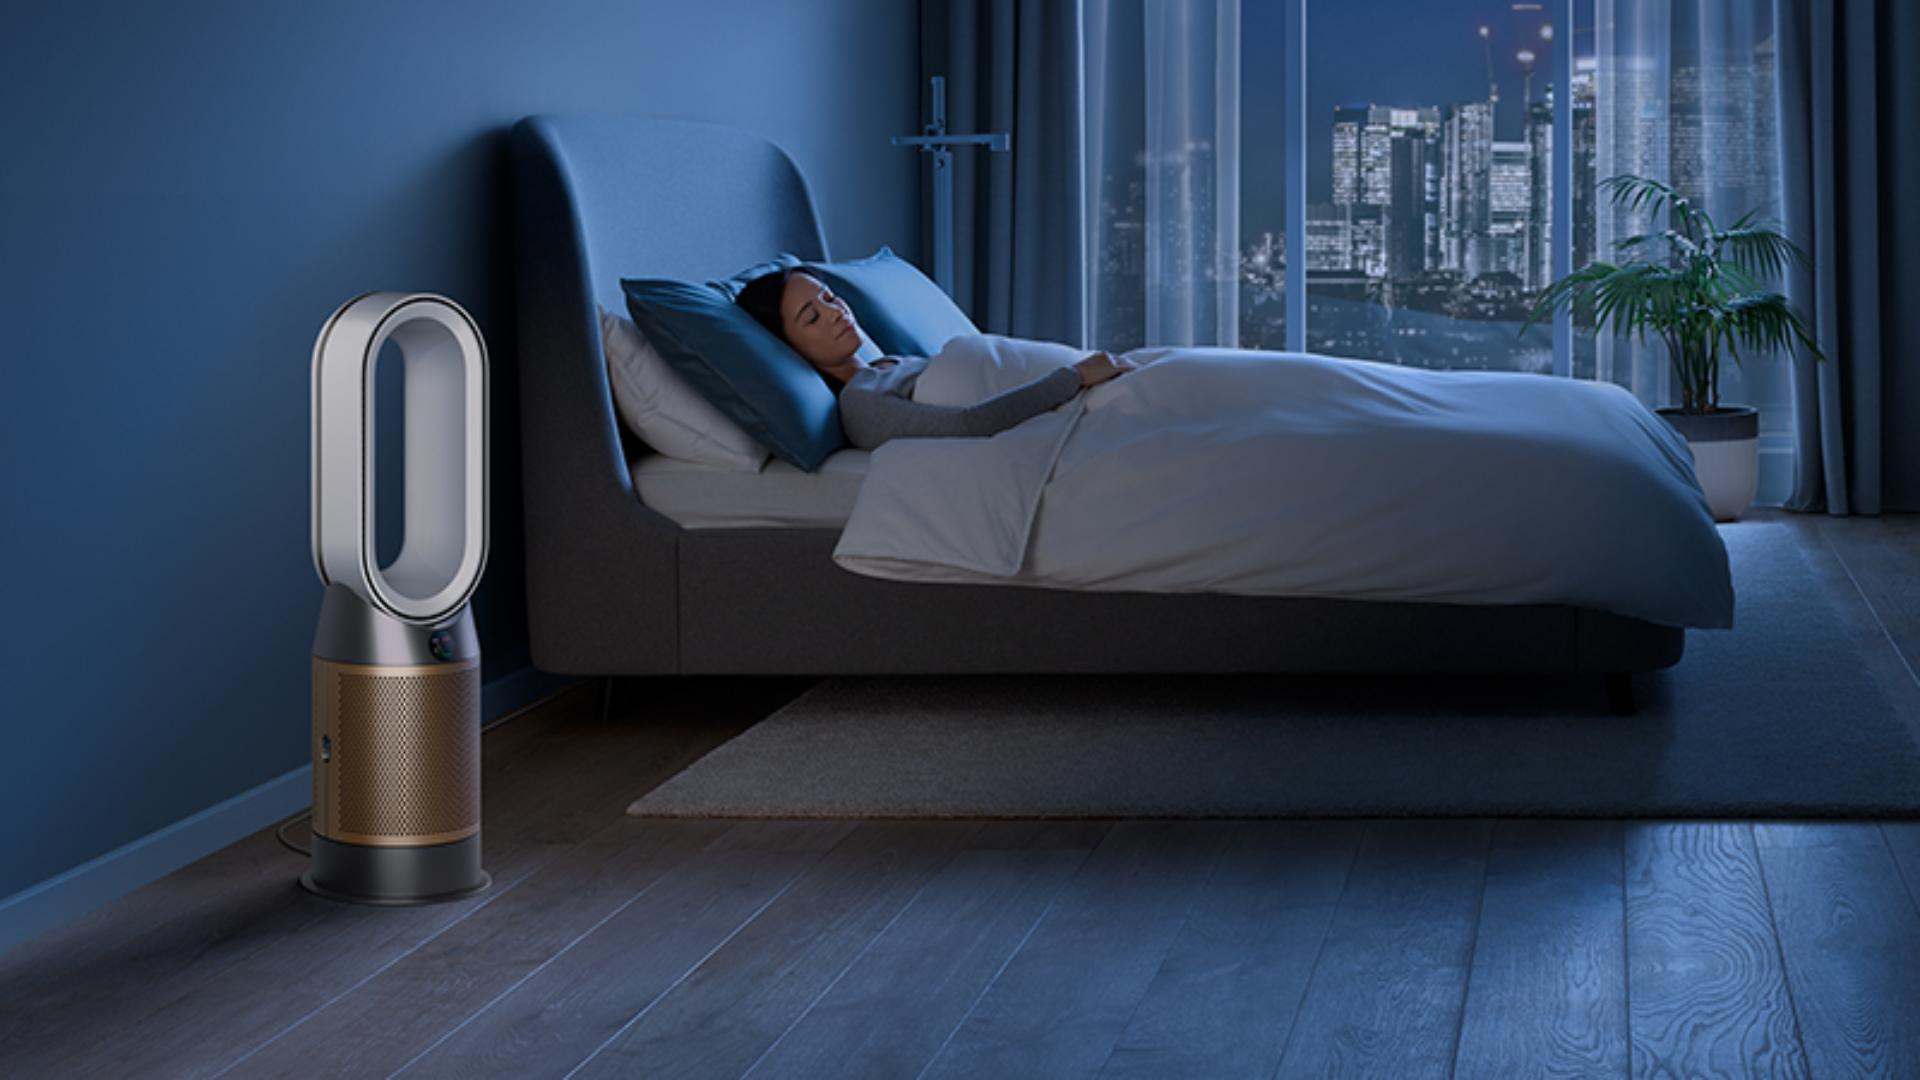 Dyson air purifier in a dark bedroom with someone sleeping peacefully